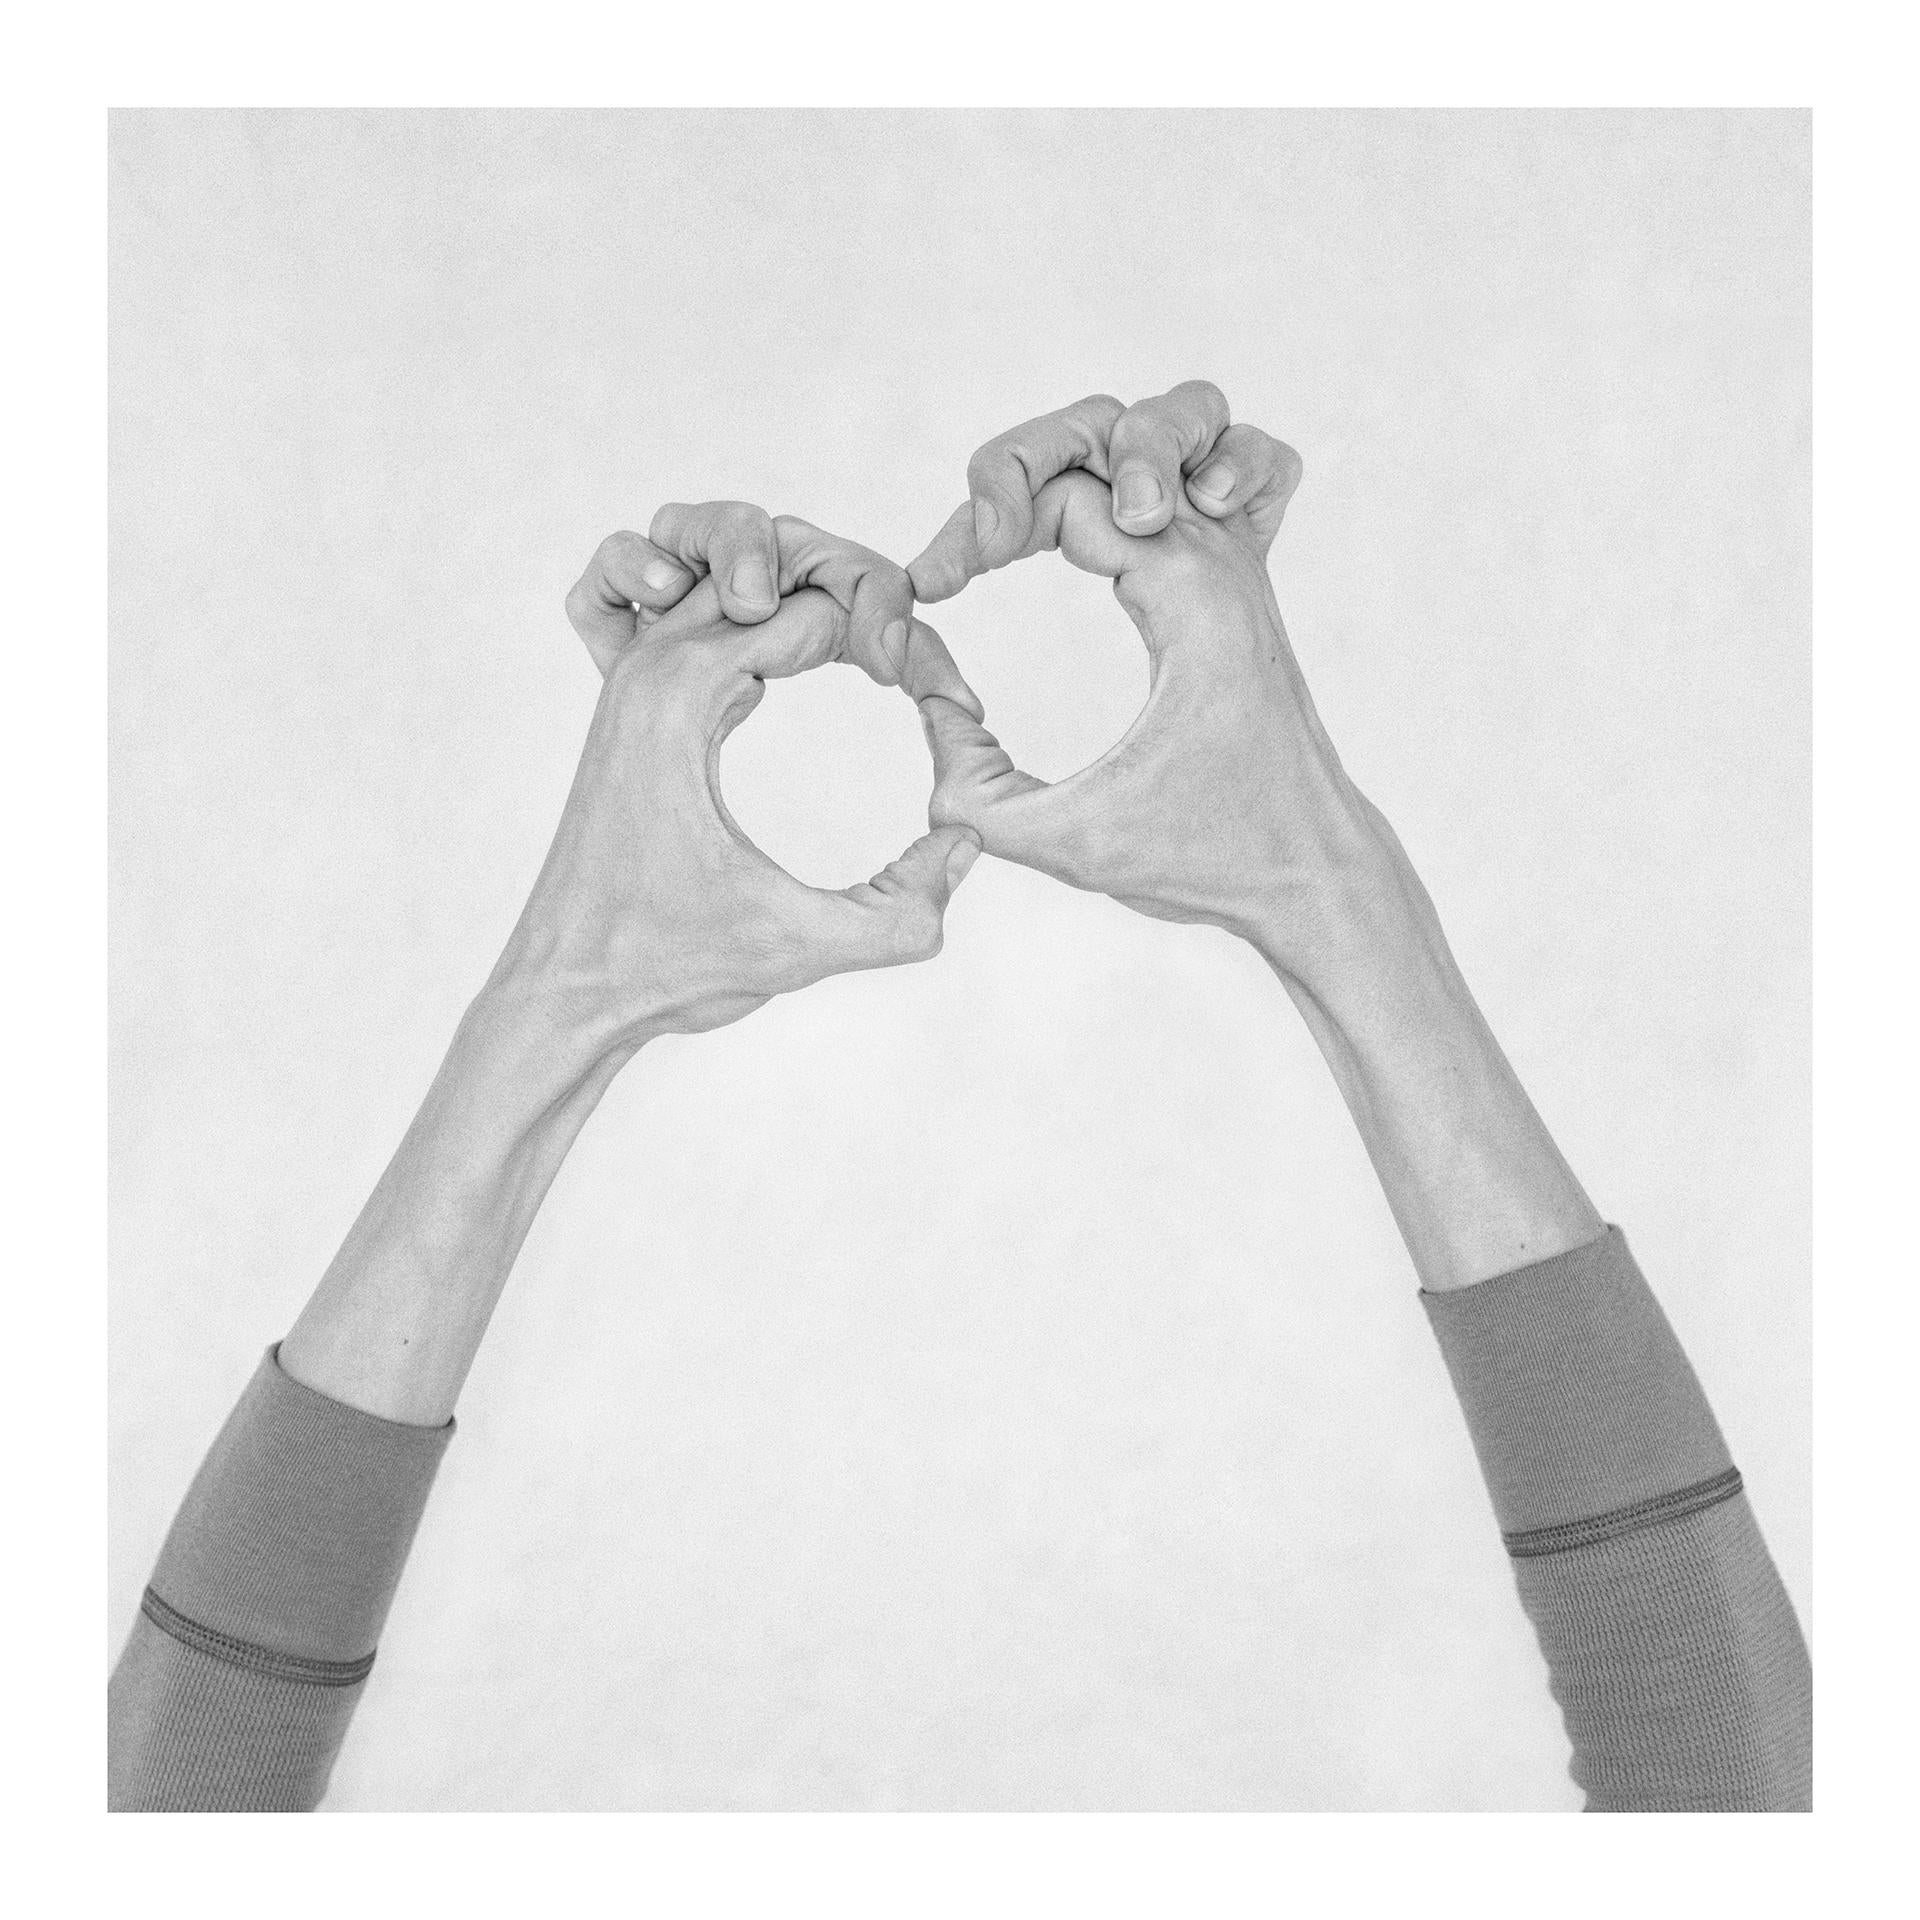 Untitled XXXIX. From the Series Chiromorphose. Hands. Black & White Photography